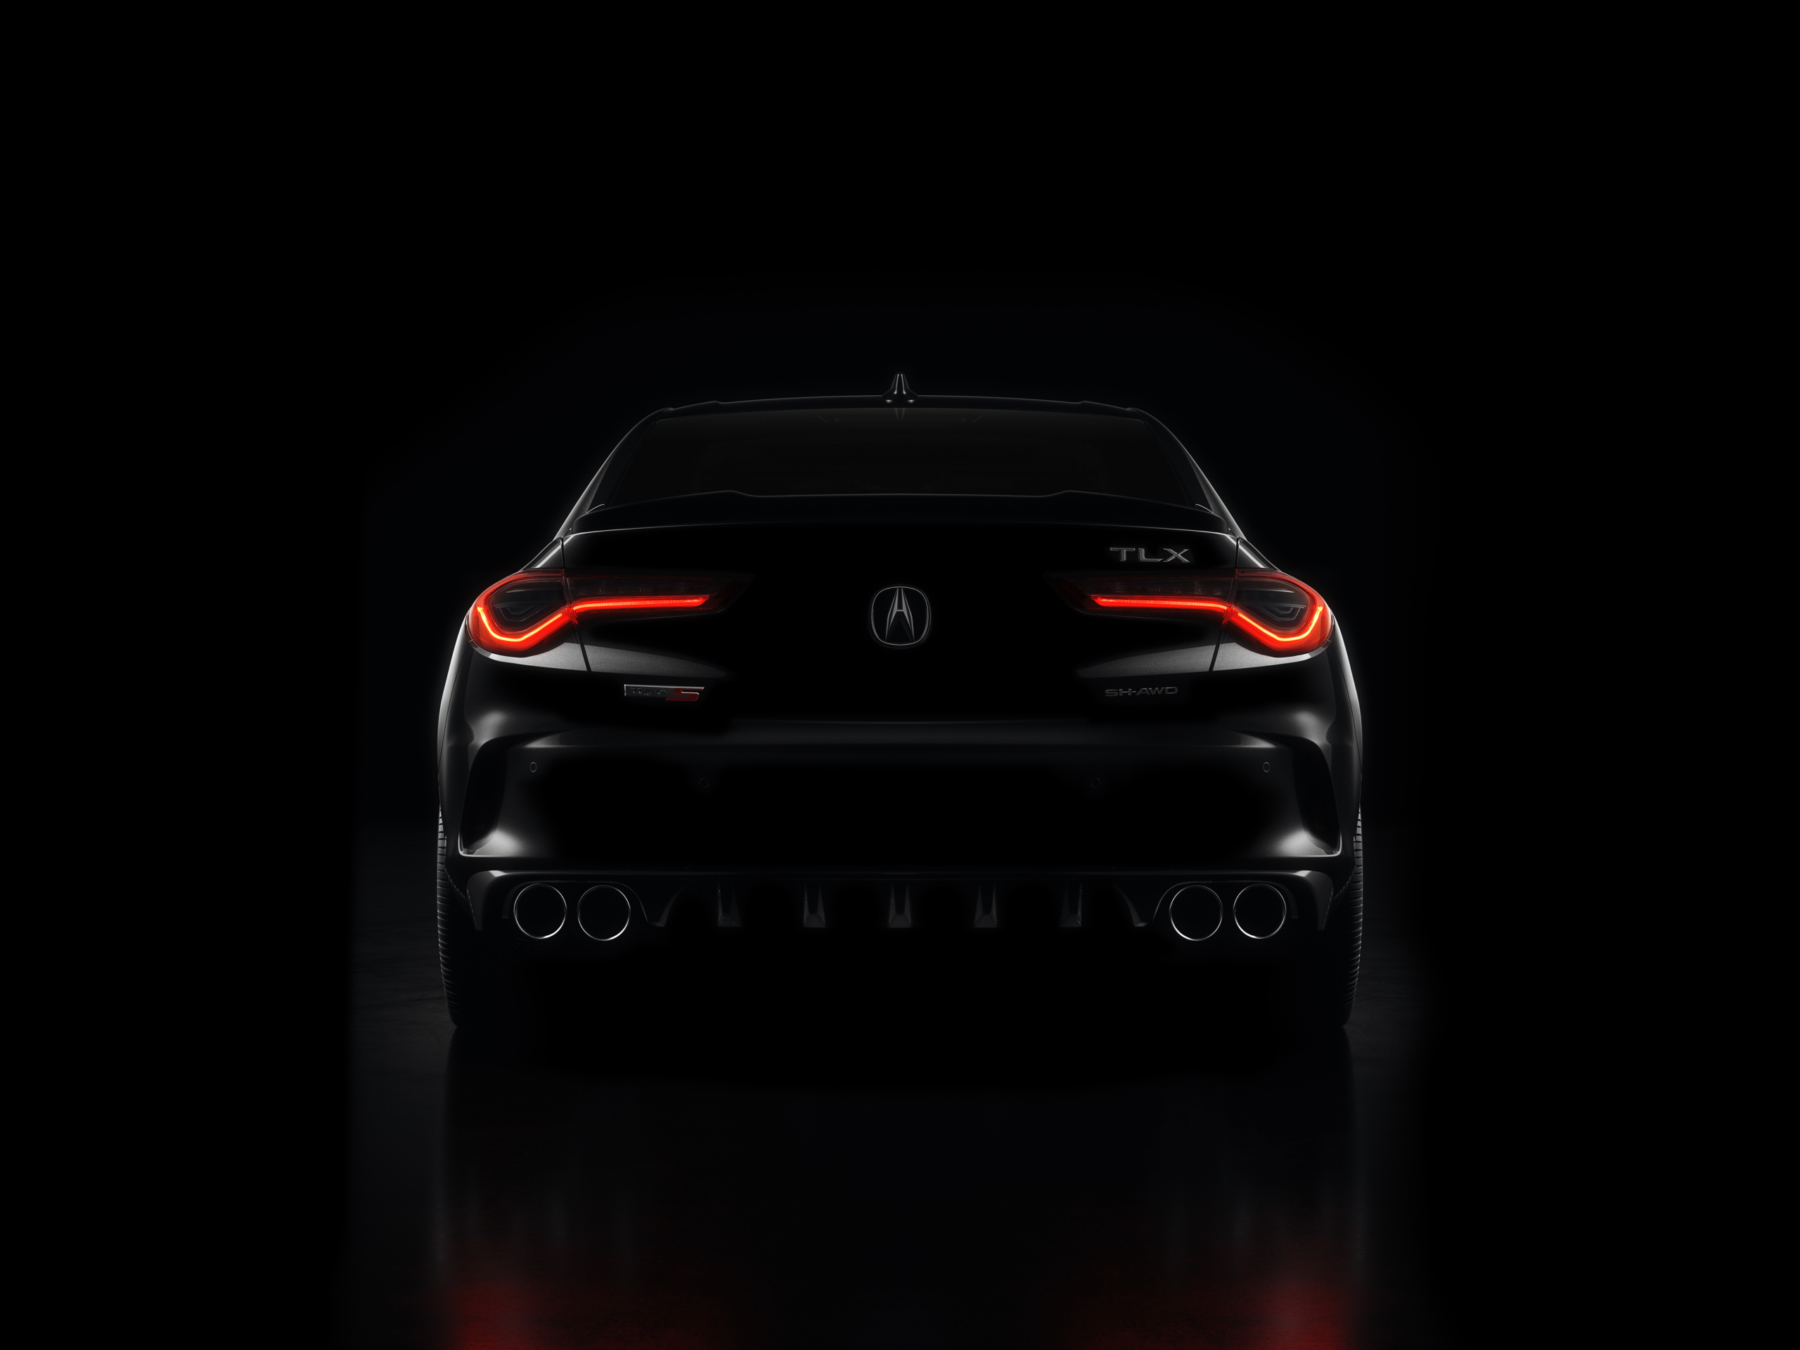 Here's a look at the upcoming 2021 Acura TLX | Hooniverse